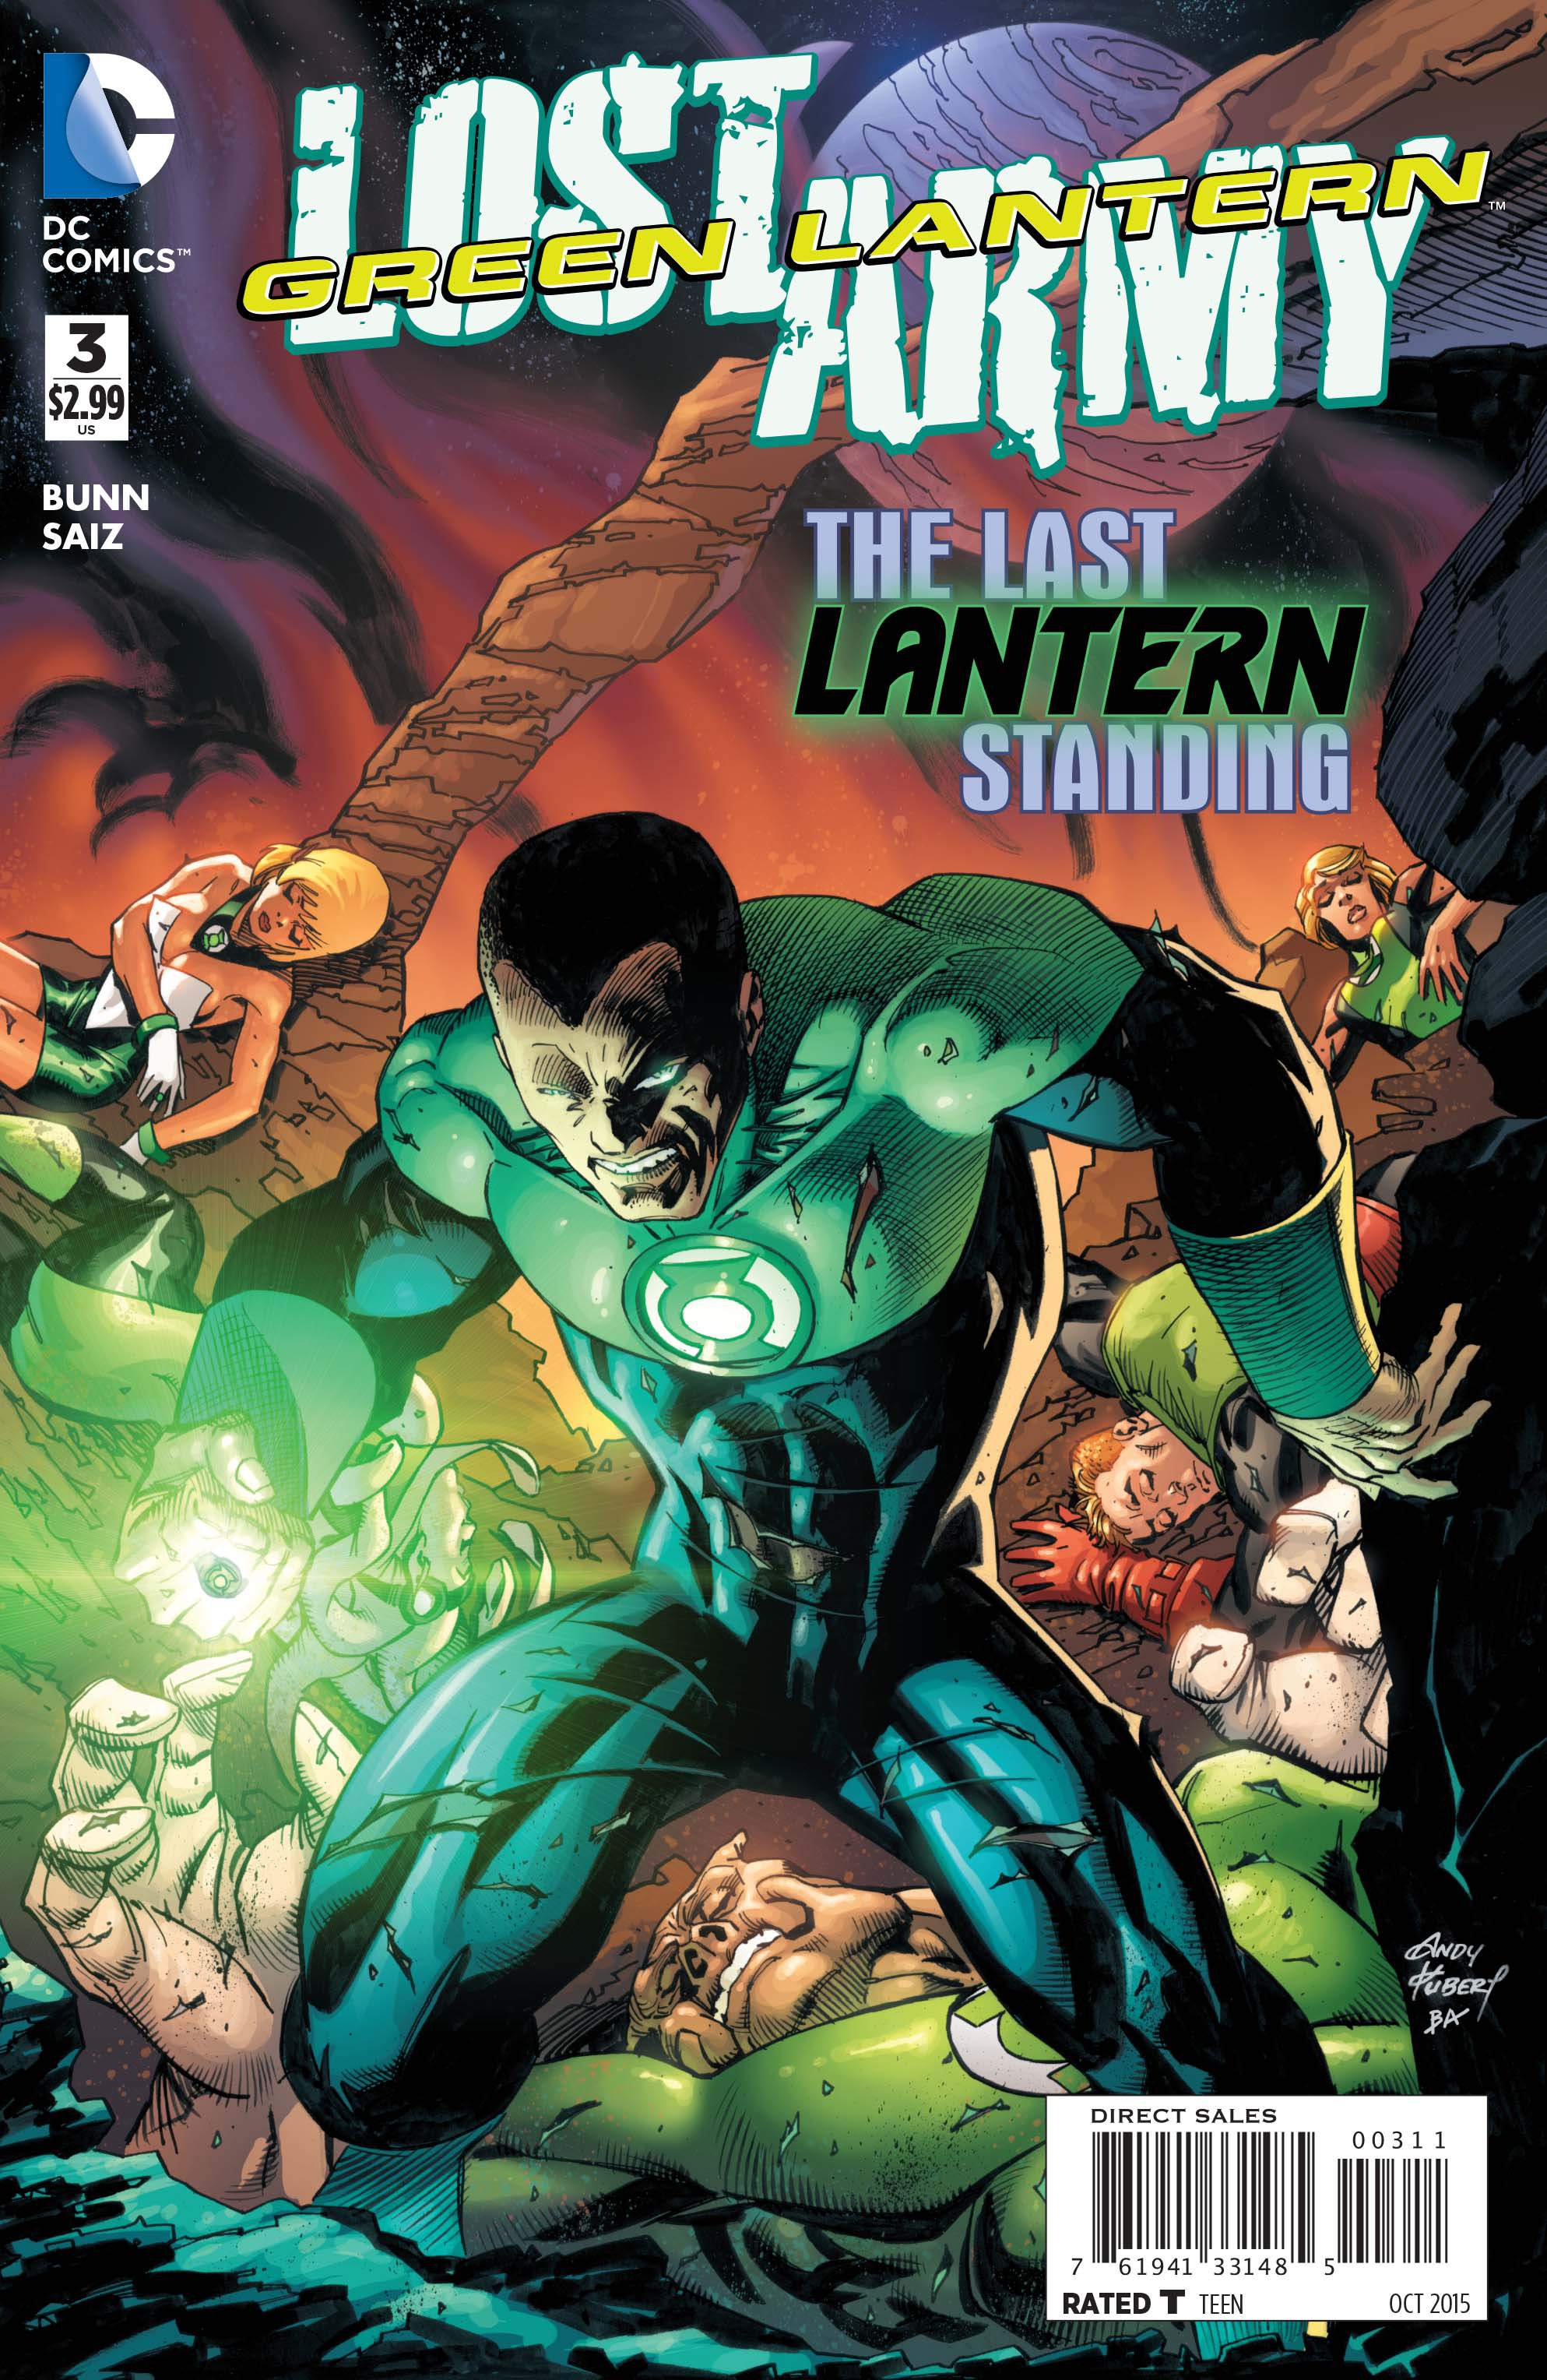 GREEN LANTERN THE LOST ARMY #3